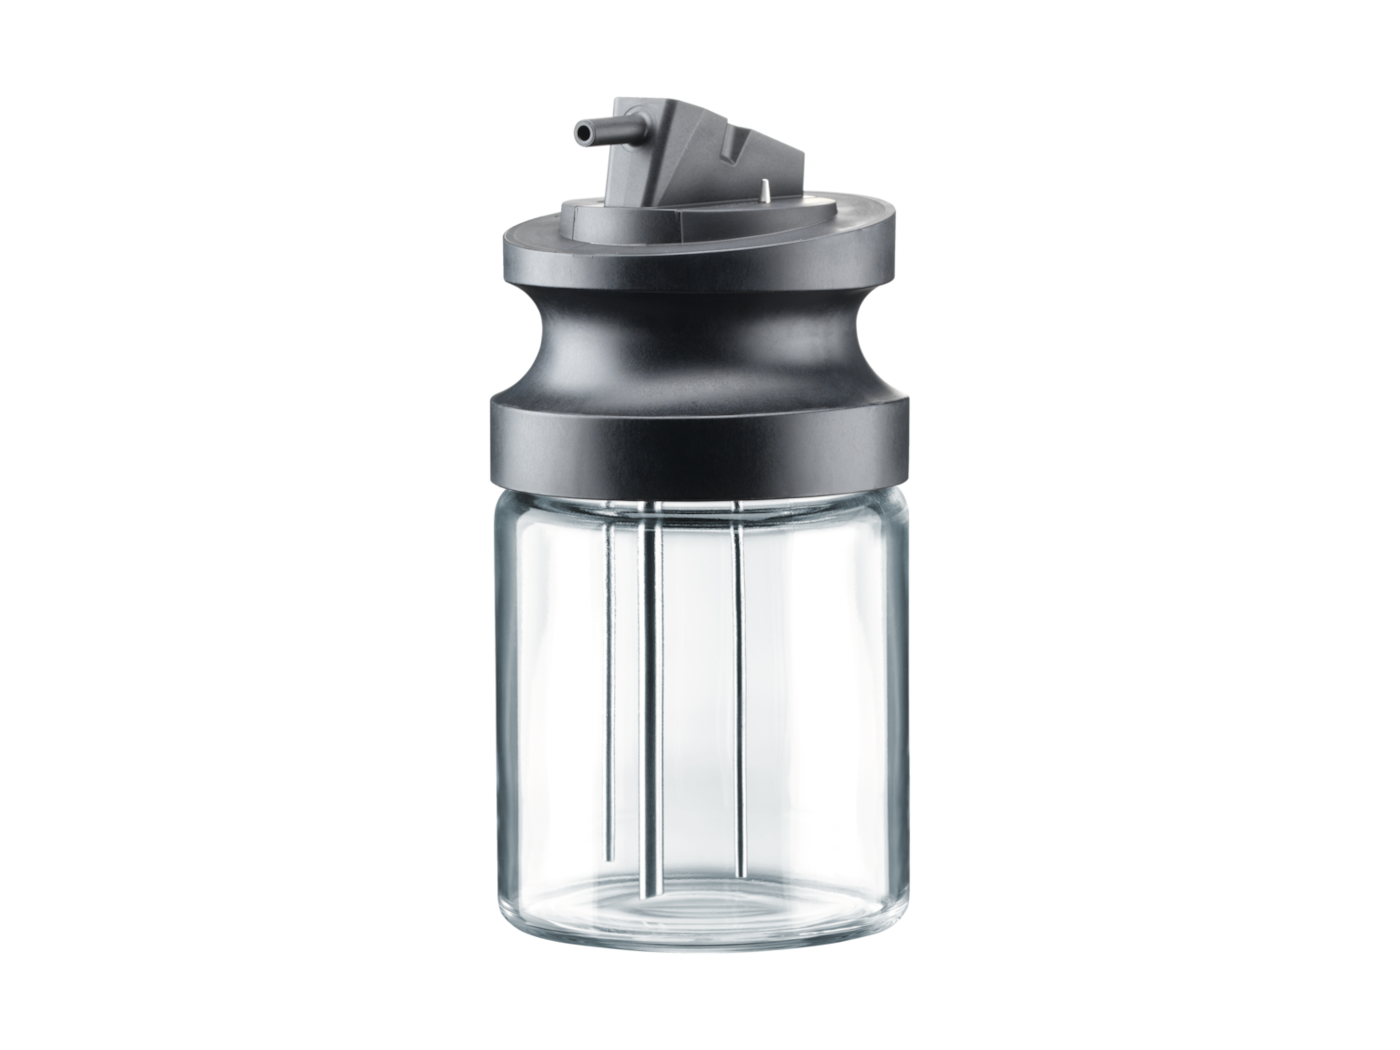 MB-CVA 7000 Milk container made of glass product photo